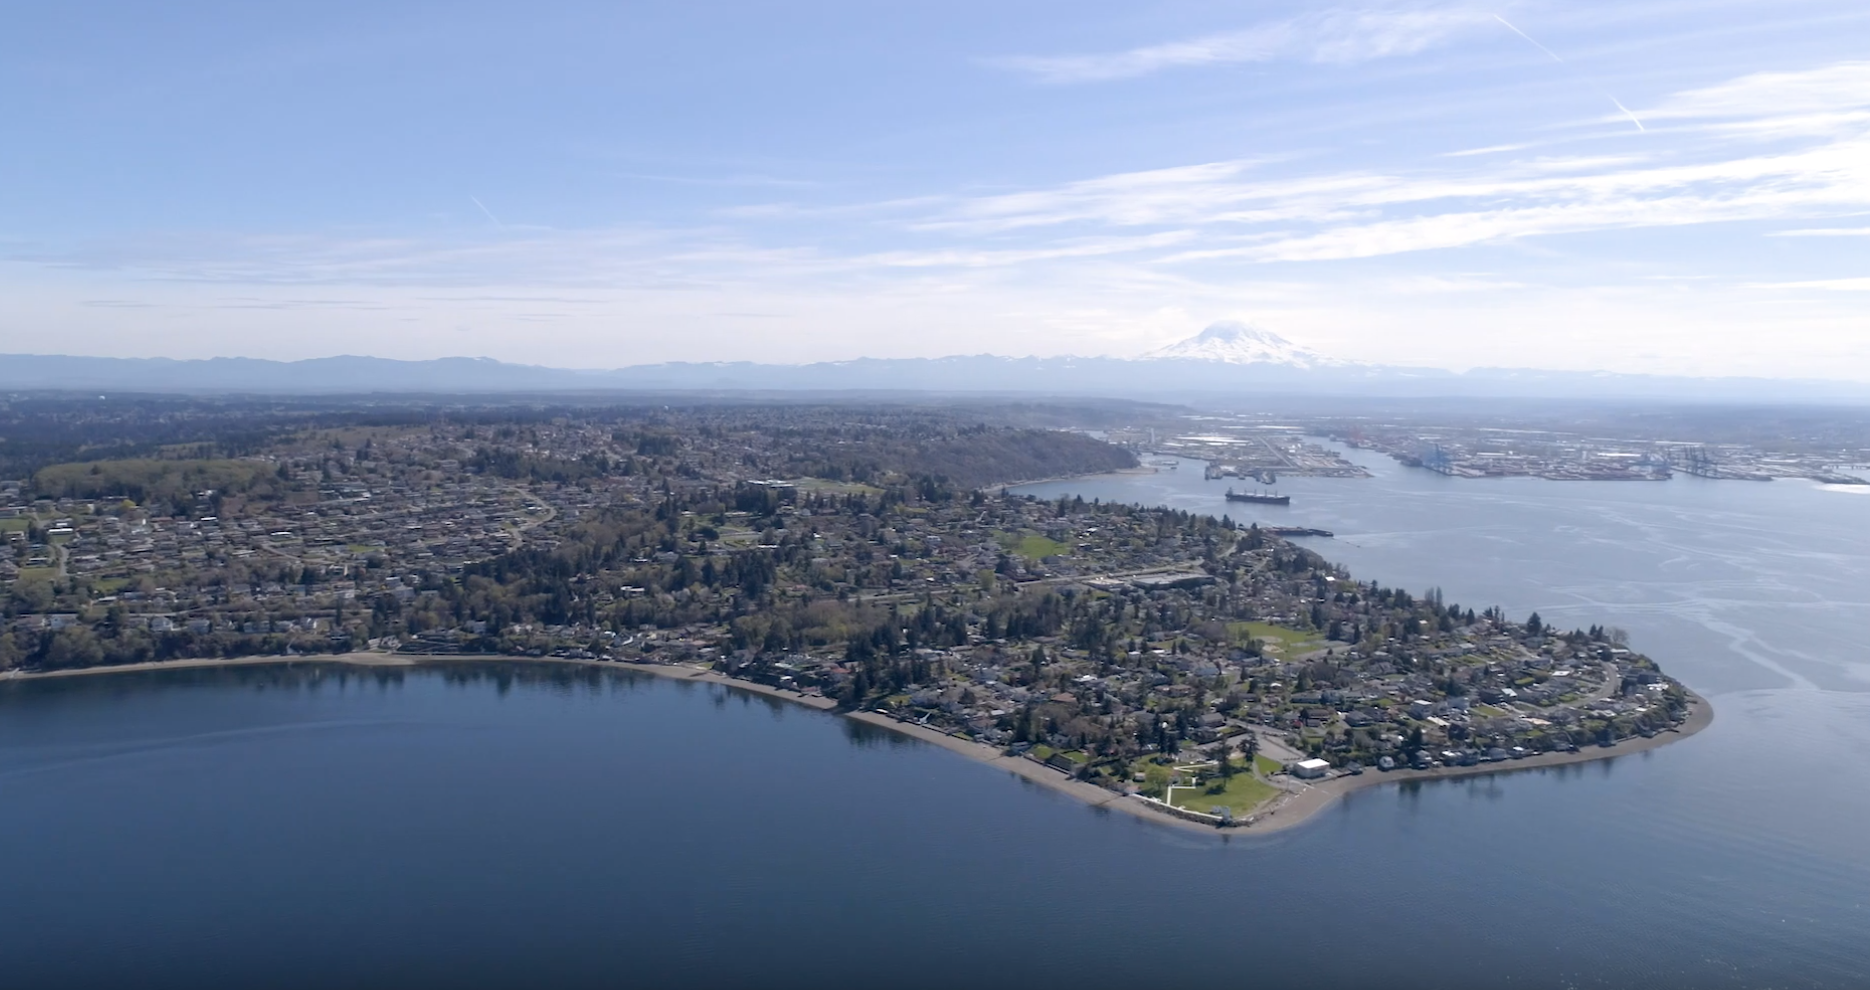 Summer 2019: Tacoma real estate market is the hottest in the country